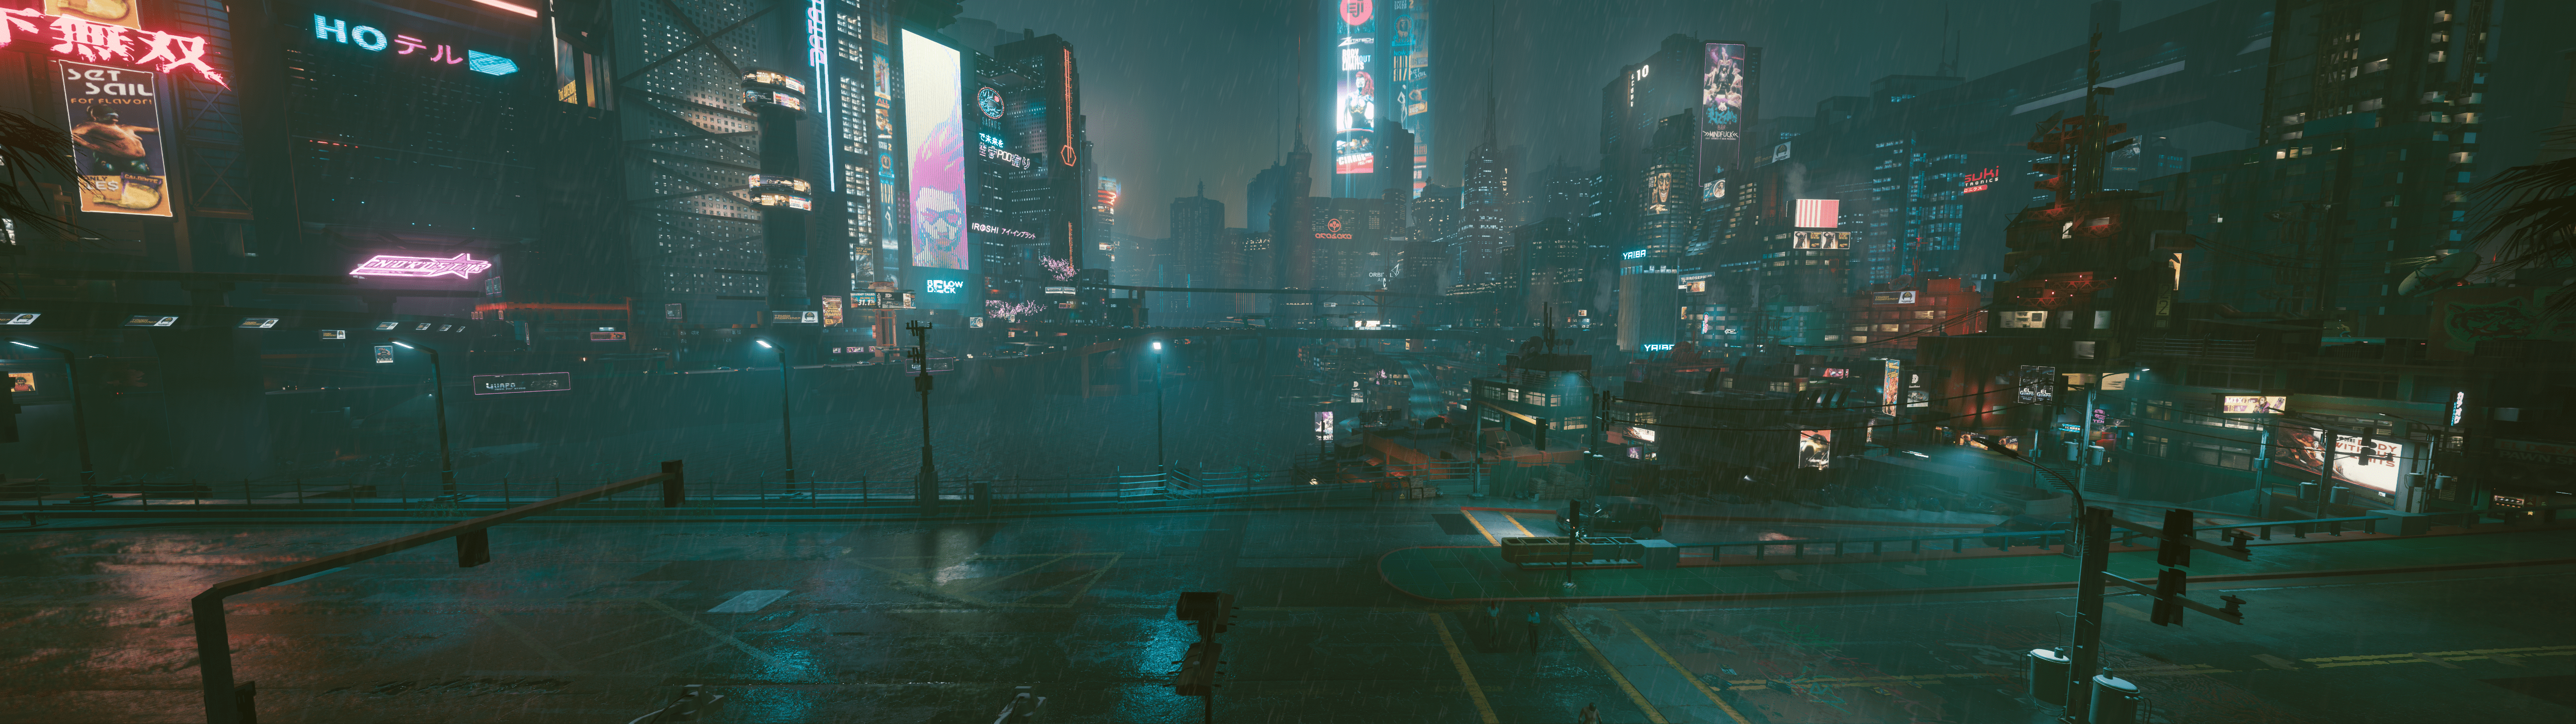 A city street with neon lights and buildings - 5120x1440